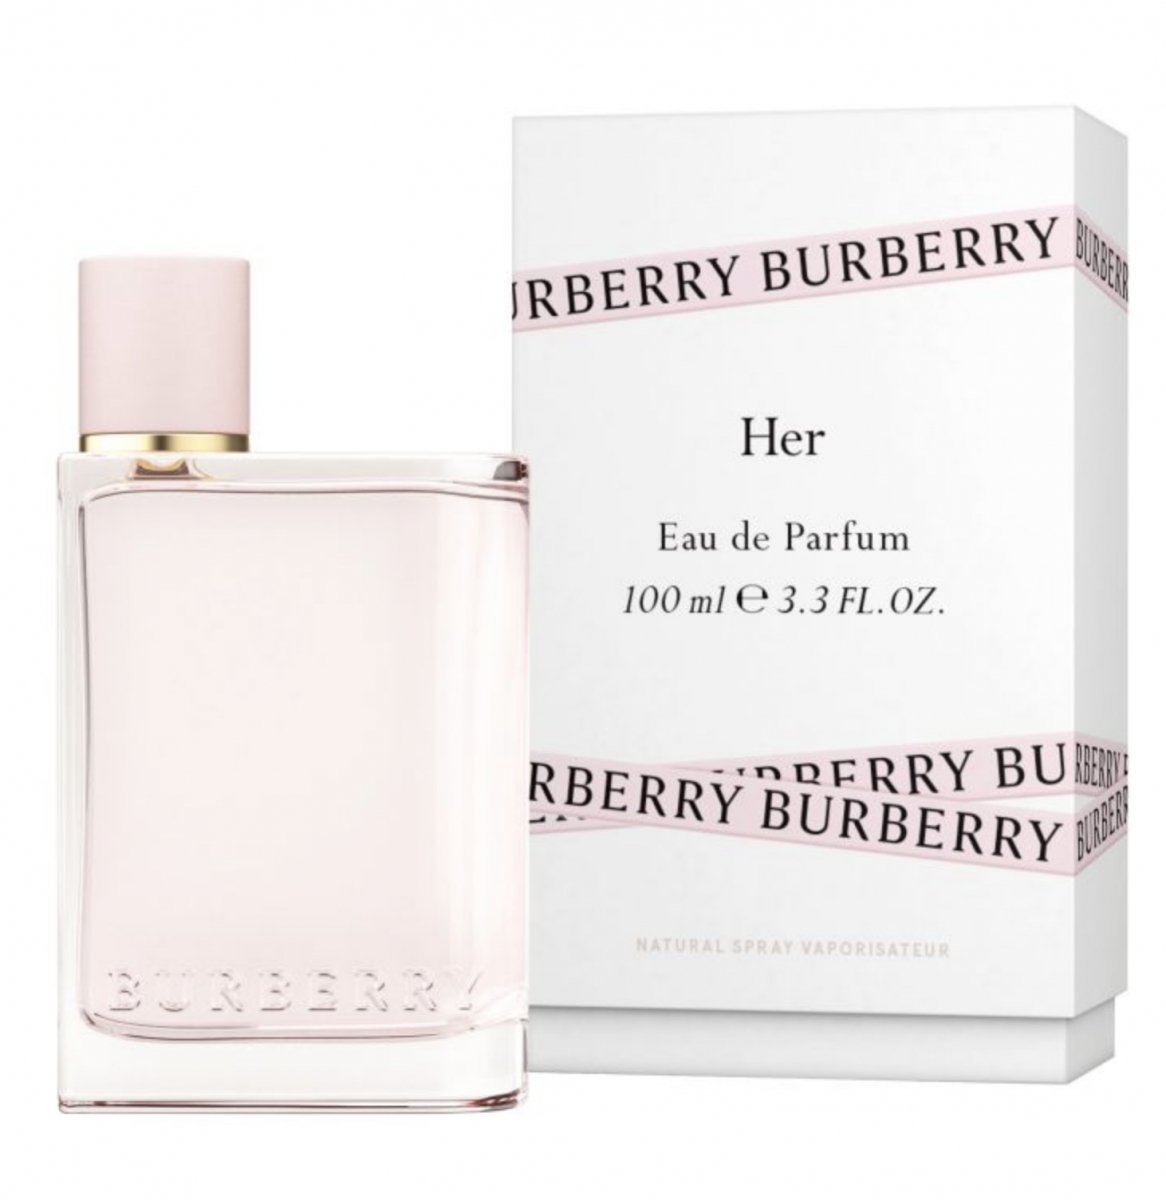 Burberry - Her | Reviews and Rating